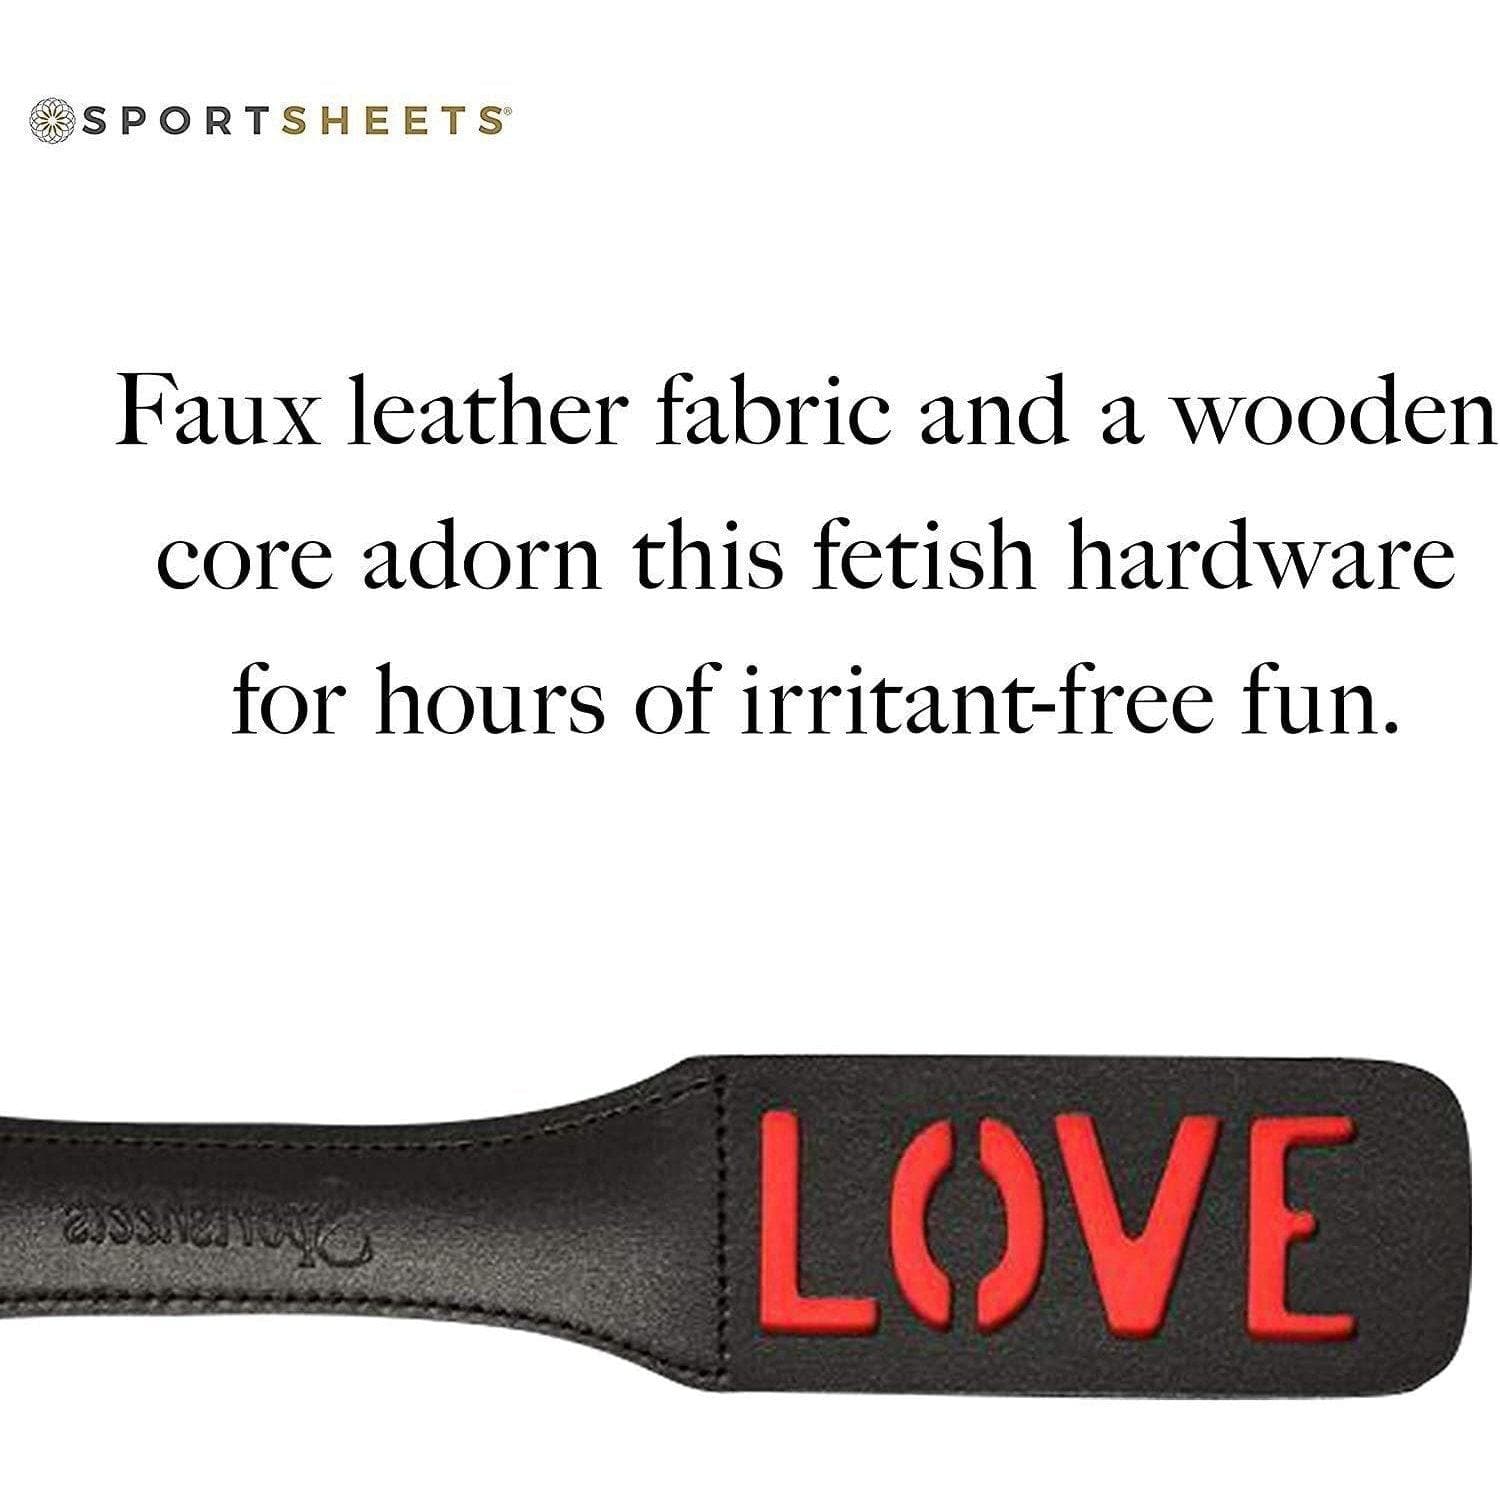 Leather Impression Paddle Love 12 Inch Black for Couples Playful Sessions - Romantic Blessings